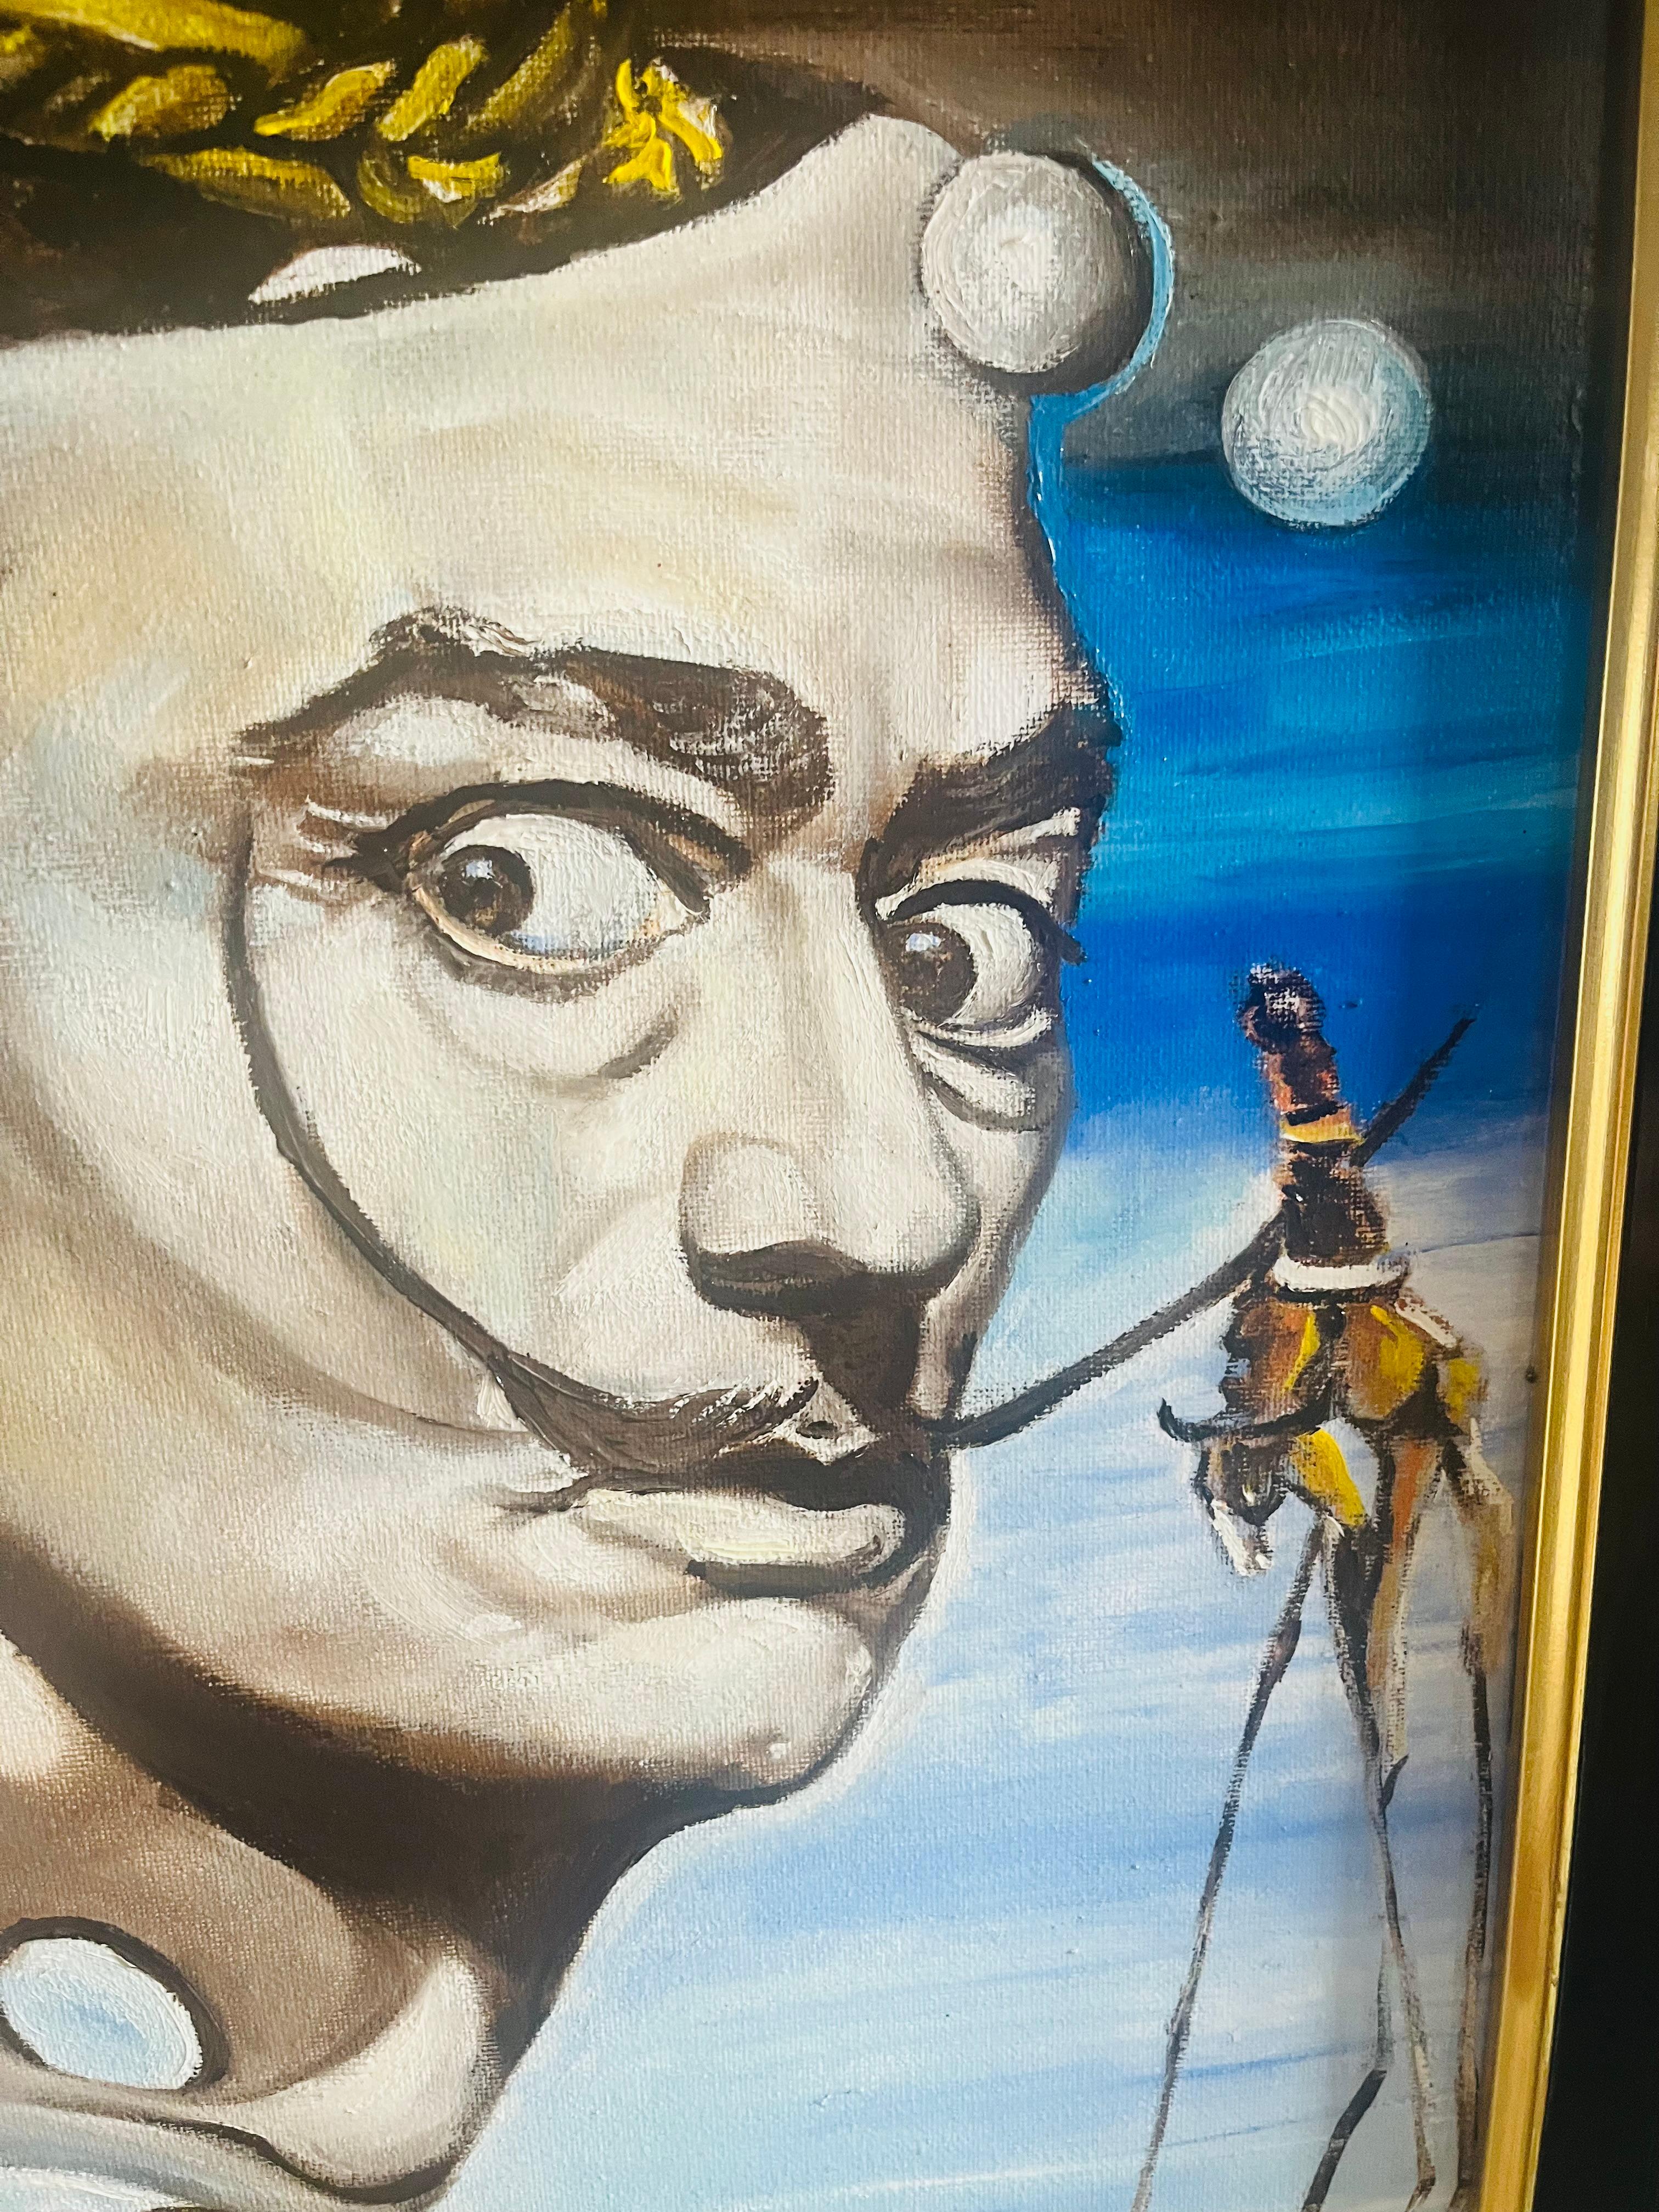               **ANNUAL SUPER SALE UNTIL APRIL 15TH ONLY**
*This Price Won't Be Repeated Again This Year - Take Advantage Of It*

'Saving Salvador' by Laura Mass is a flip portrait of the one and only Salvador Dali; making his portrait with super